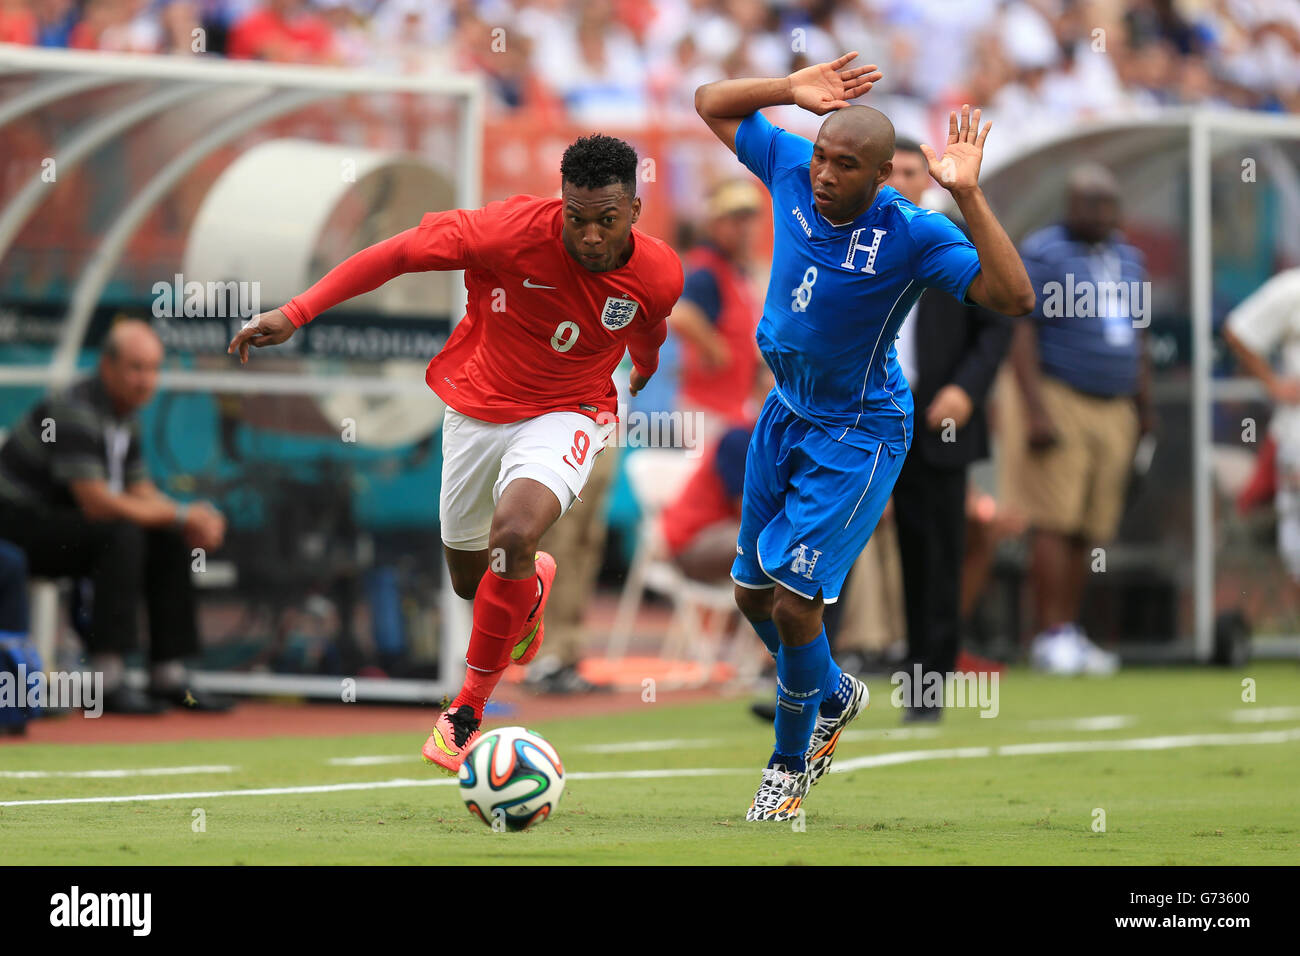 England's Daniel Sturridge (left) and Honduras' Wilson Palacios battle for the ball during the International Friendly at the Sun Life Stadium, Miami, USA. PRESS ASSOCIATION Photo. Picture date: Saturday June 7, 2014. See PA story SOCCER England. Photo credit should read: Mike Egerton/PA Wire. Stock Photo